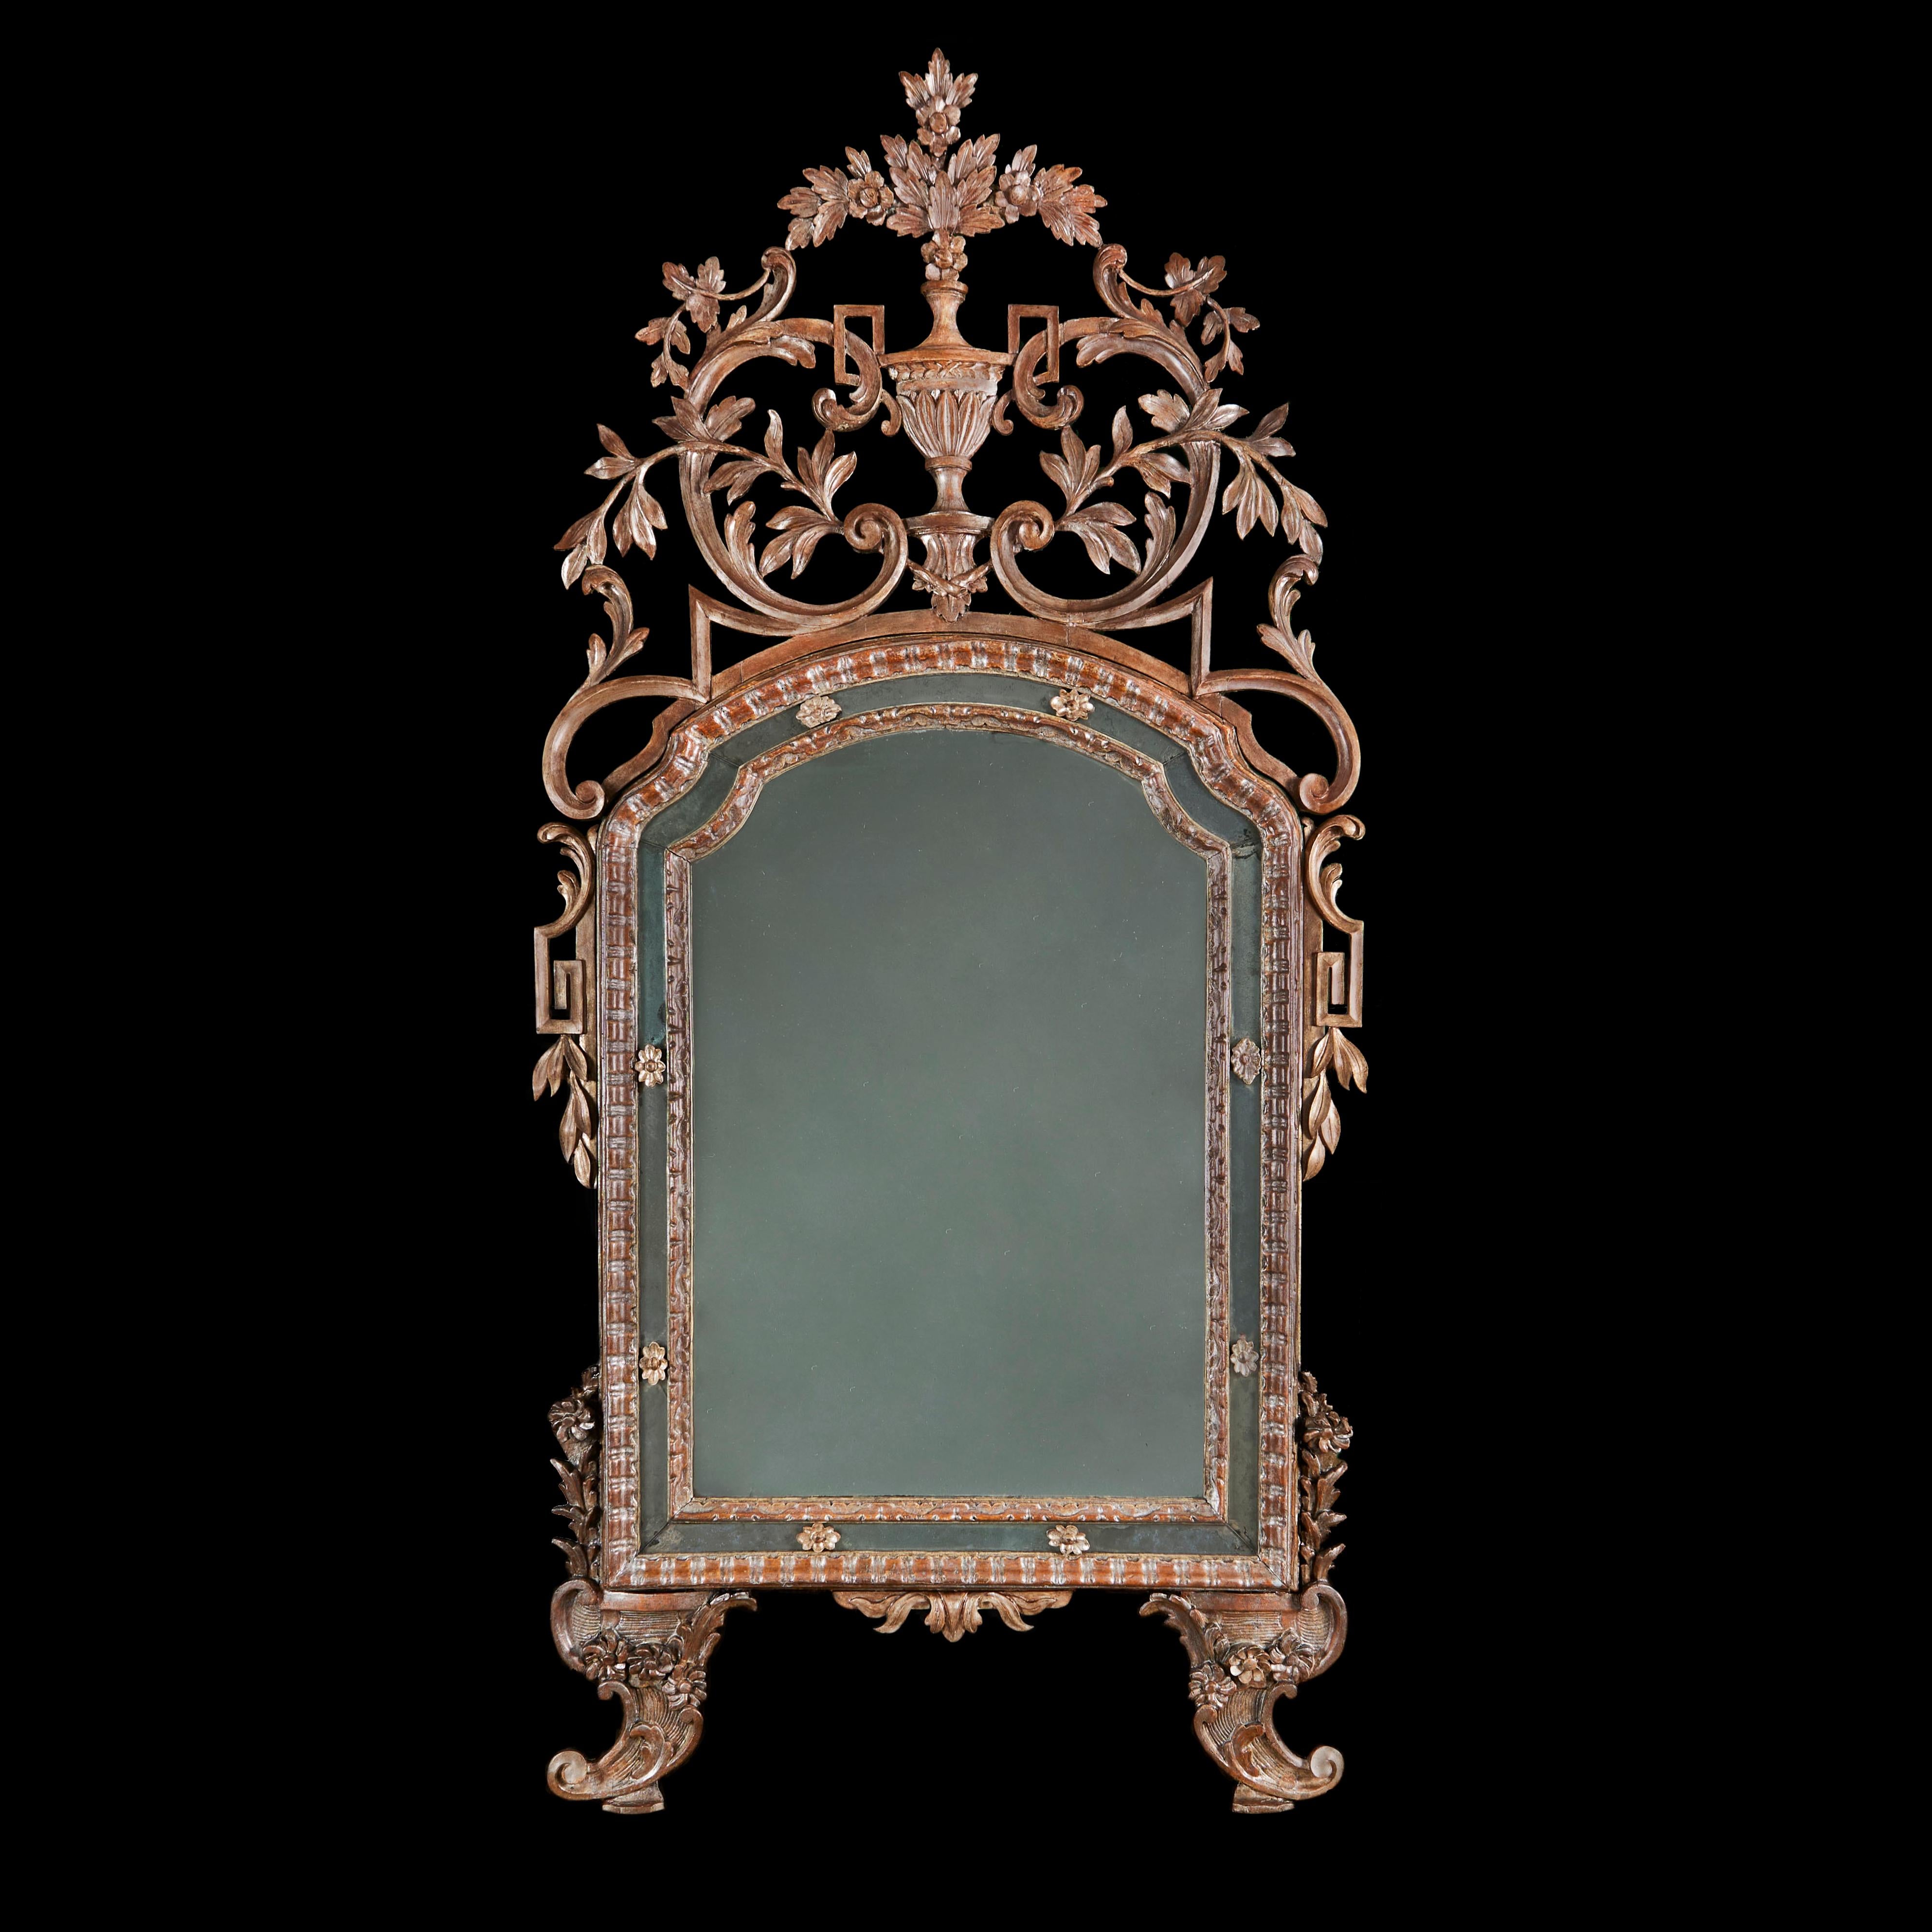 Piedmont, Italy, circa 1780

An exceptional late eighteenth century Rococo pier mirror, with carved and pierced cresting of foliate design with a central urn and spray of flowers, the frame also with Greek Key elements to the sides and scrolling